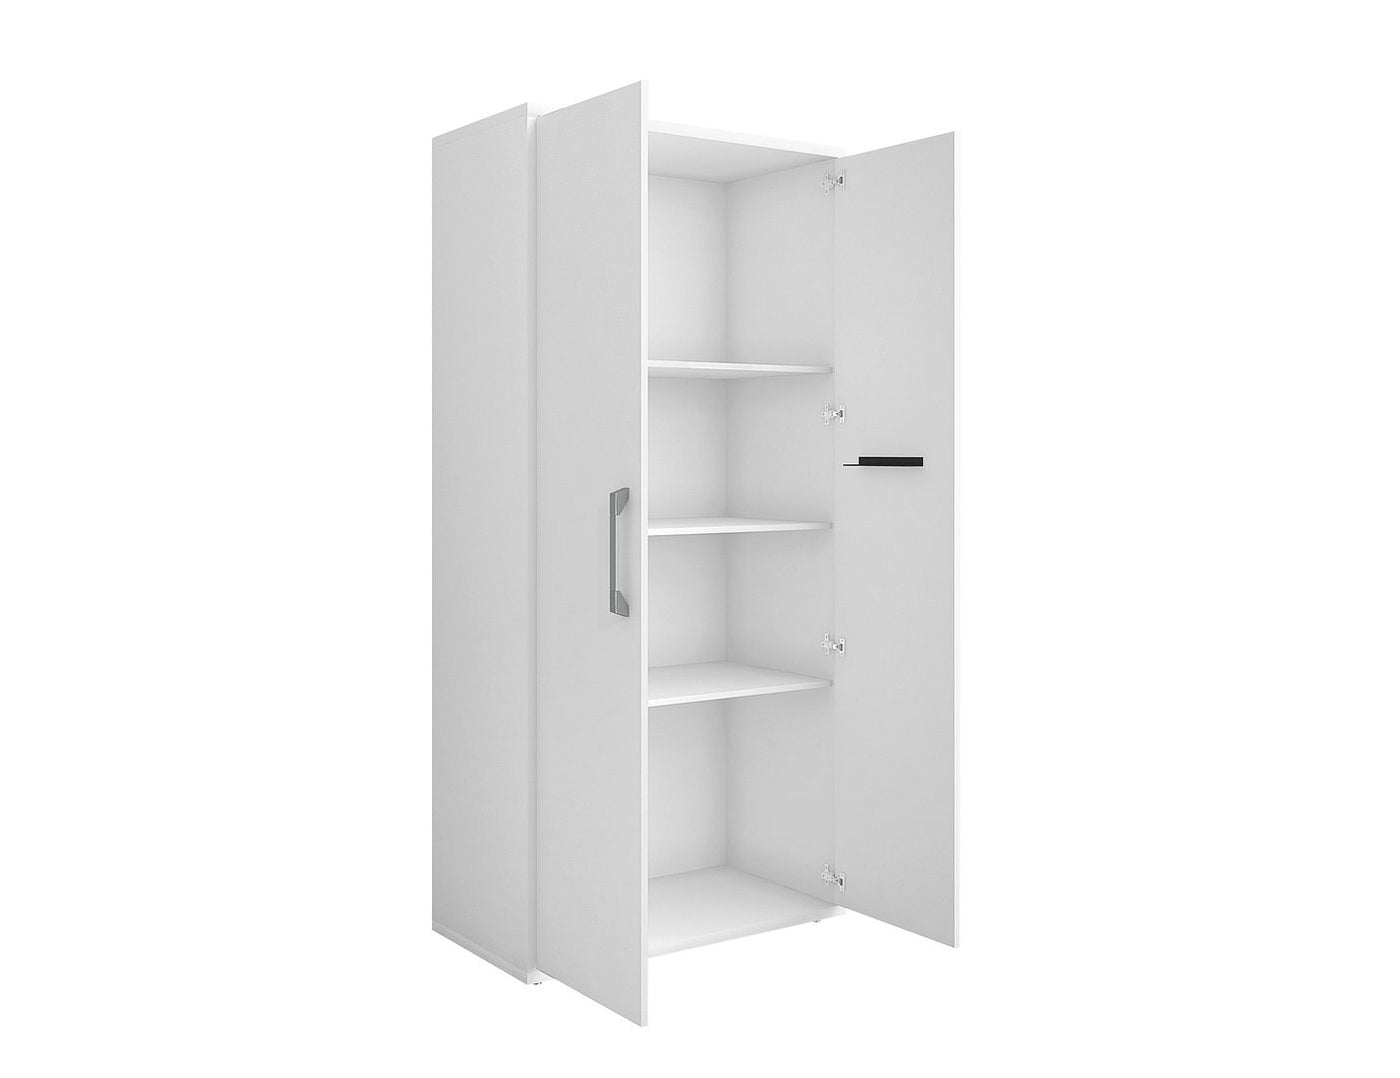 Lunde Tall Garage Cabinet - White Gloss